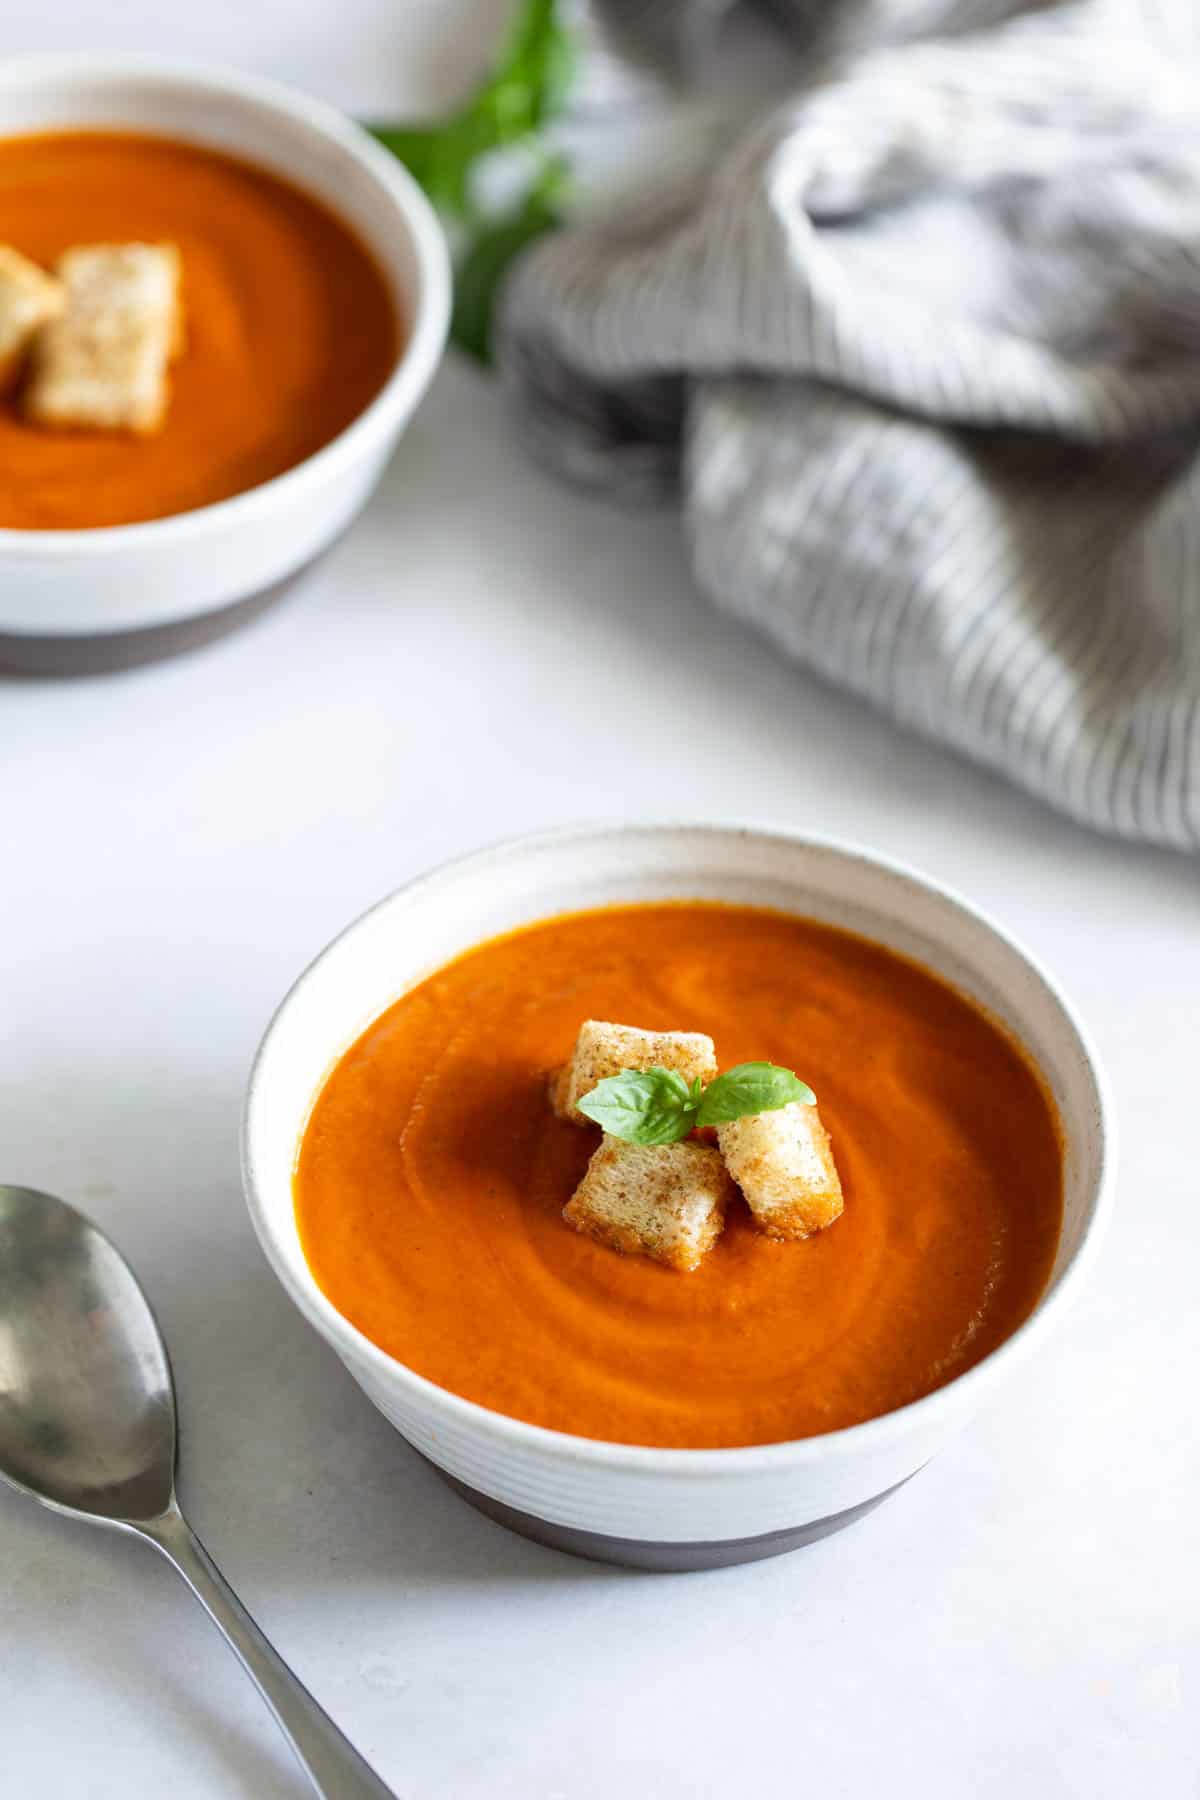 A bowl of tomato soup topped with croutons and a basil leaf, with a spoon and a striped napkin nearby. Another bowl of soup is in the background.